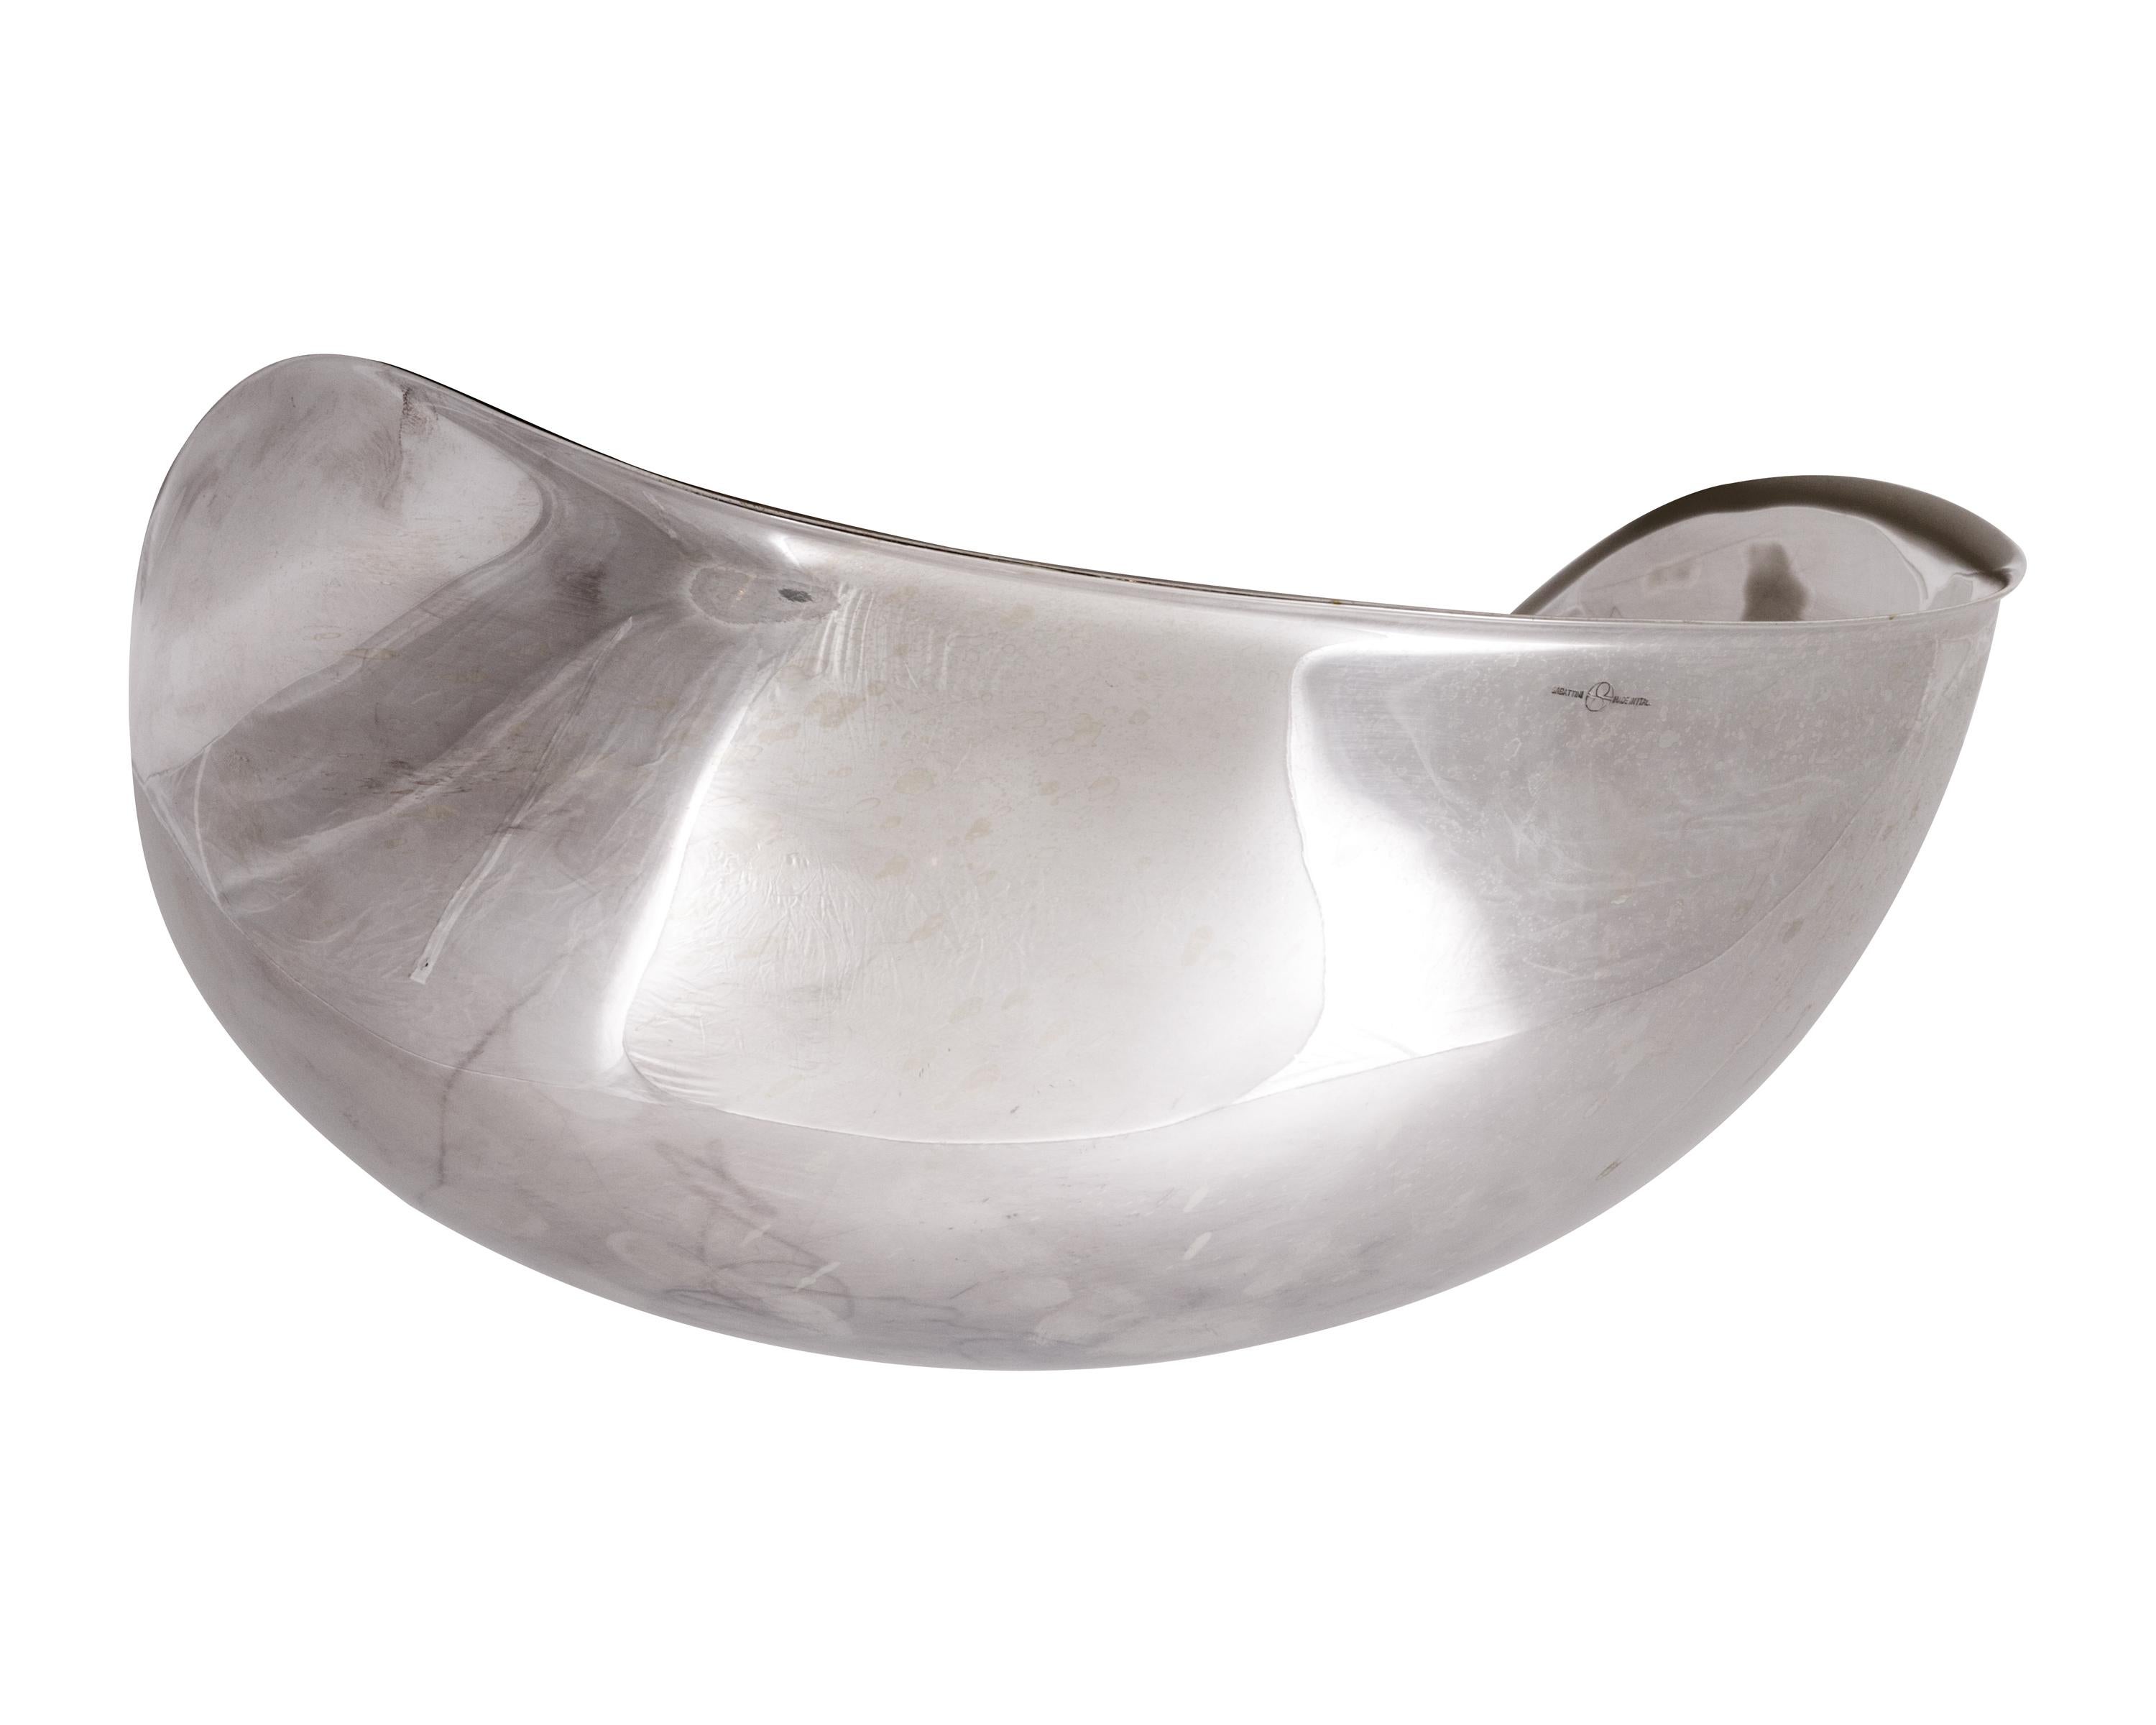 Silvered Lino Sabattini Signed Sculptural Silver Plate Centrepiece Bowl, Italy 1970s